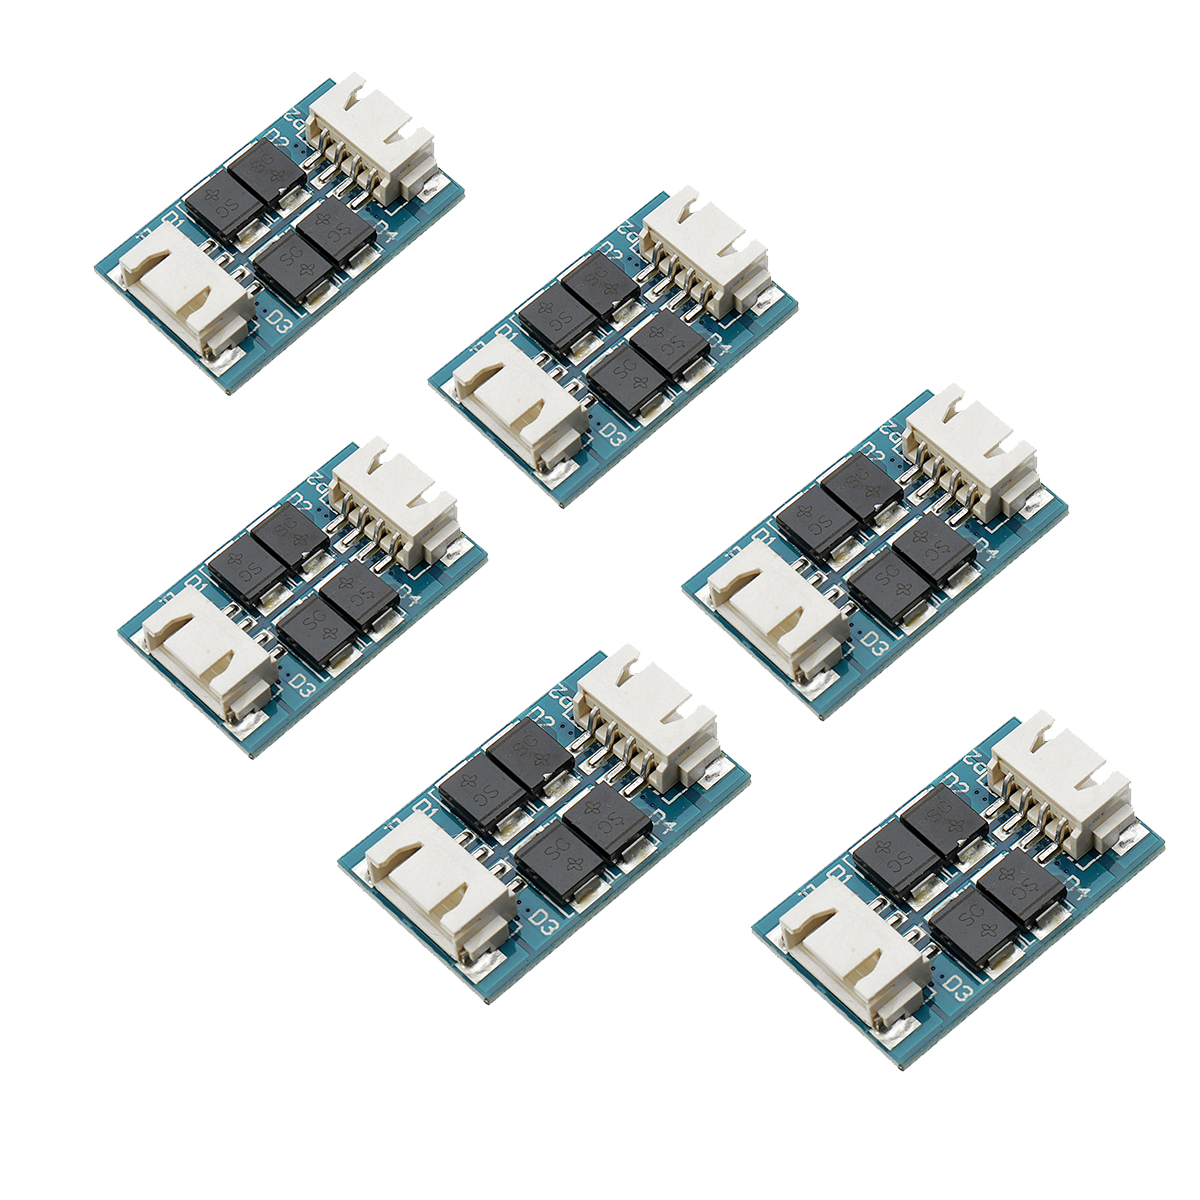 

6Pcs/Pack TL-Smoother Addon Module for 3D Printer Motor Drivers